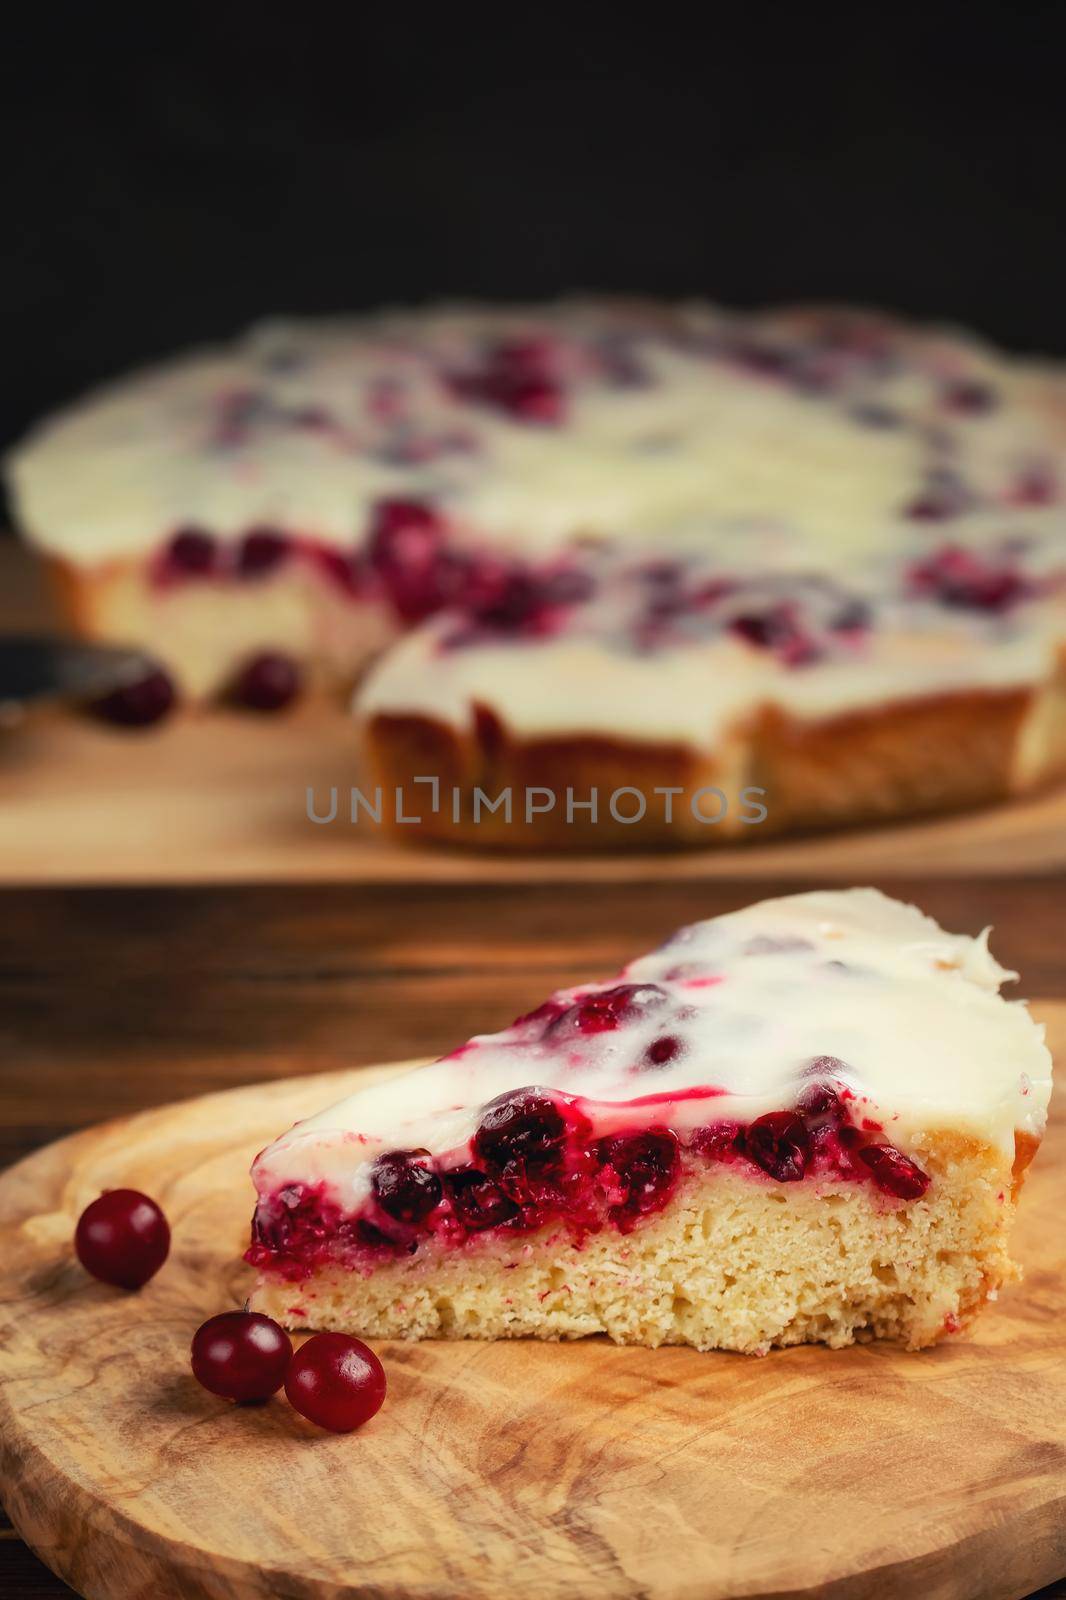 Homemade cake with cranberries and sour cream. Piece of pie close up. Vertical image by galsand